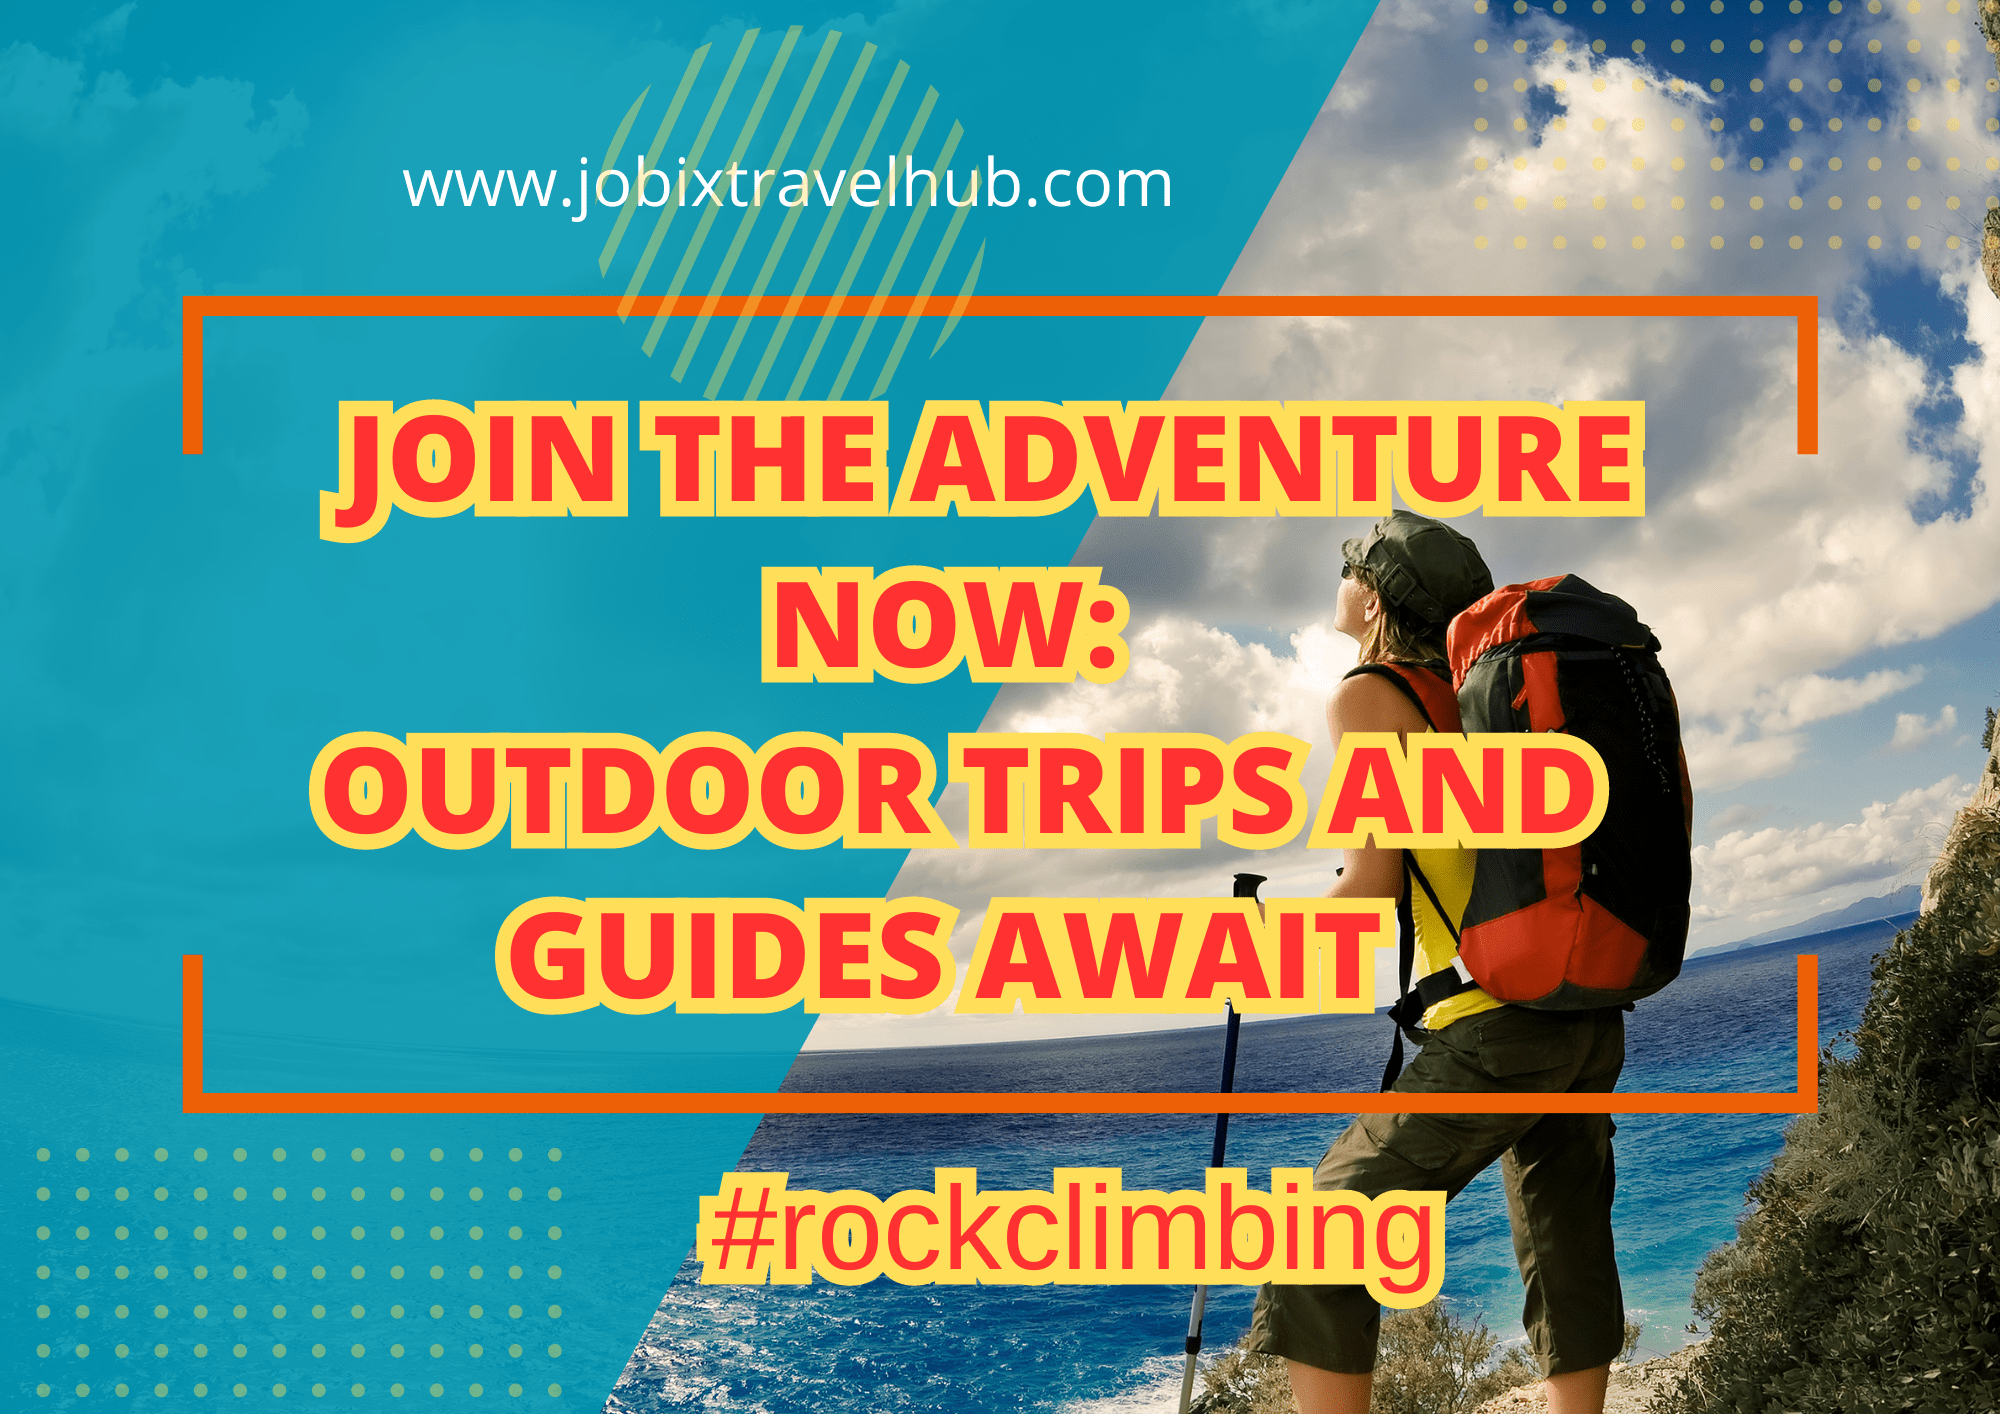 Are you looking for a way to get out of your comfort zone and explore something new but do not know where to start? Find rock climbing near me